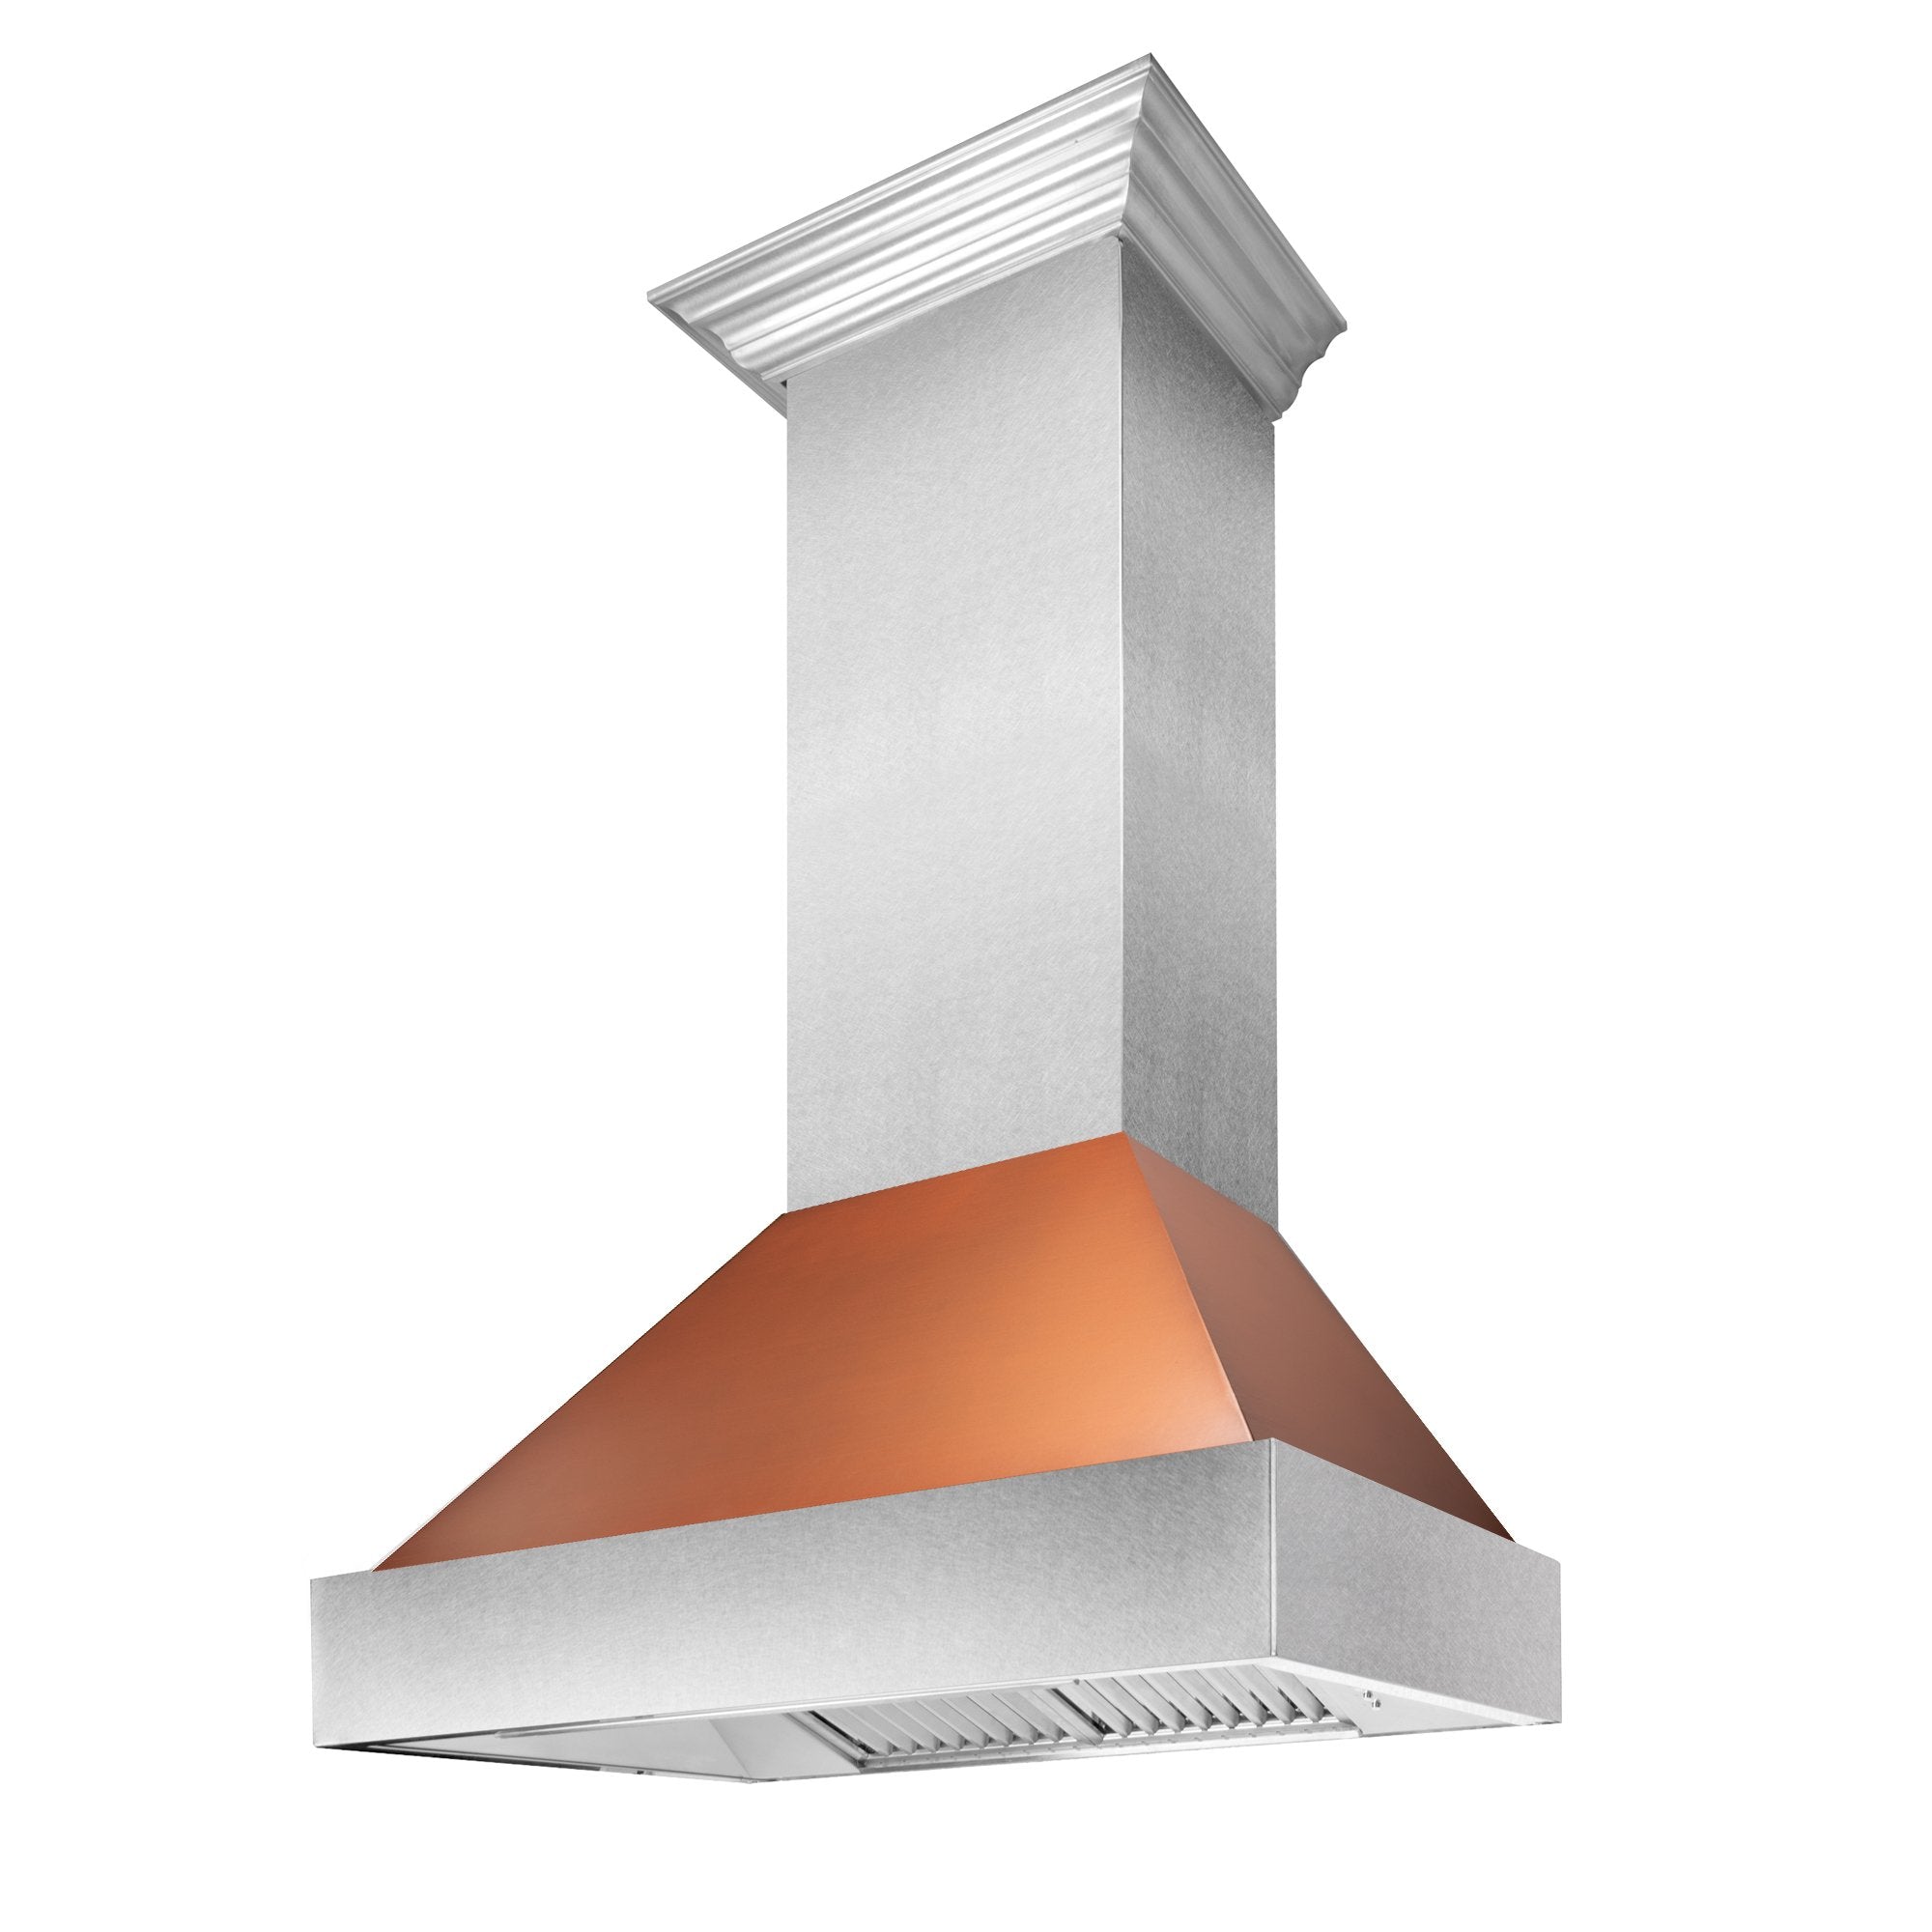 DuraSnow® Stainless Steel Range Hood with Copper Shell (8654C)